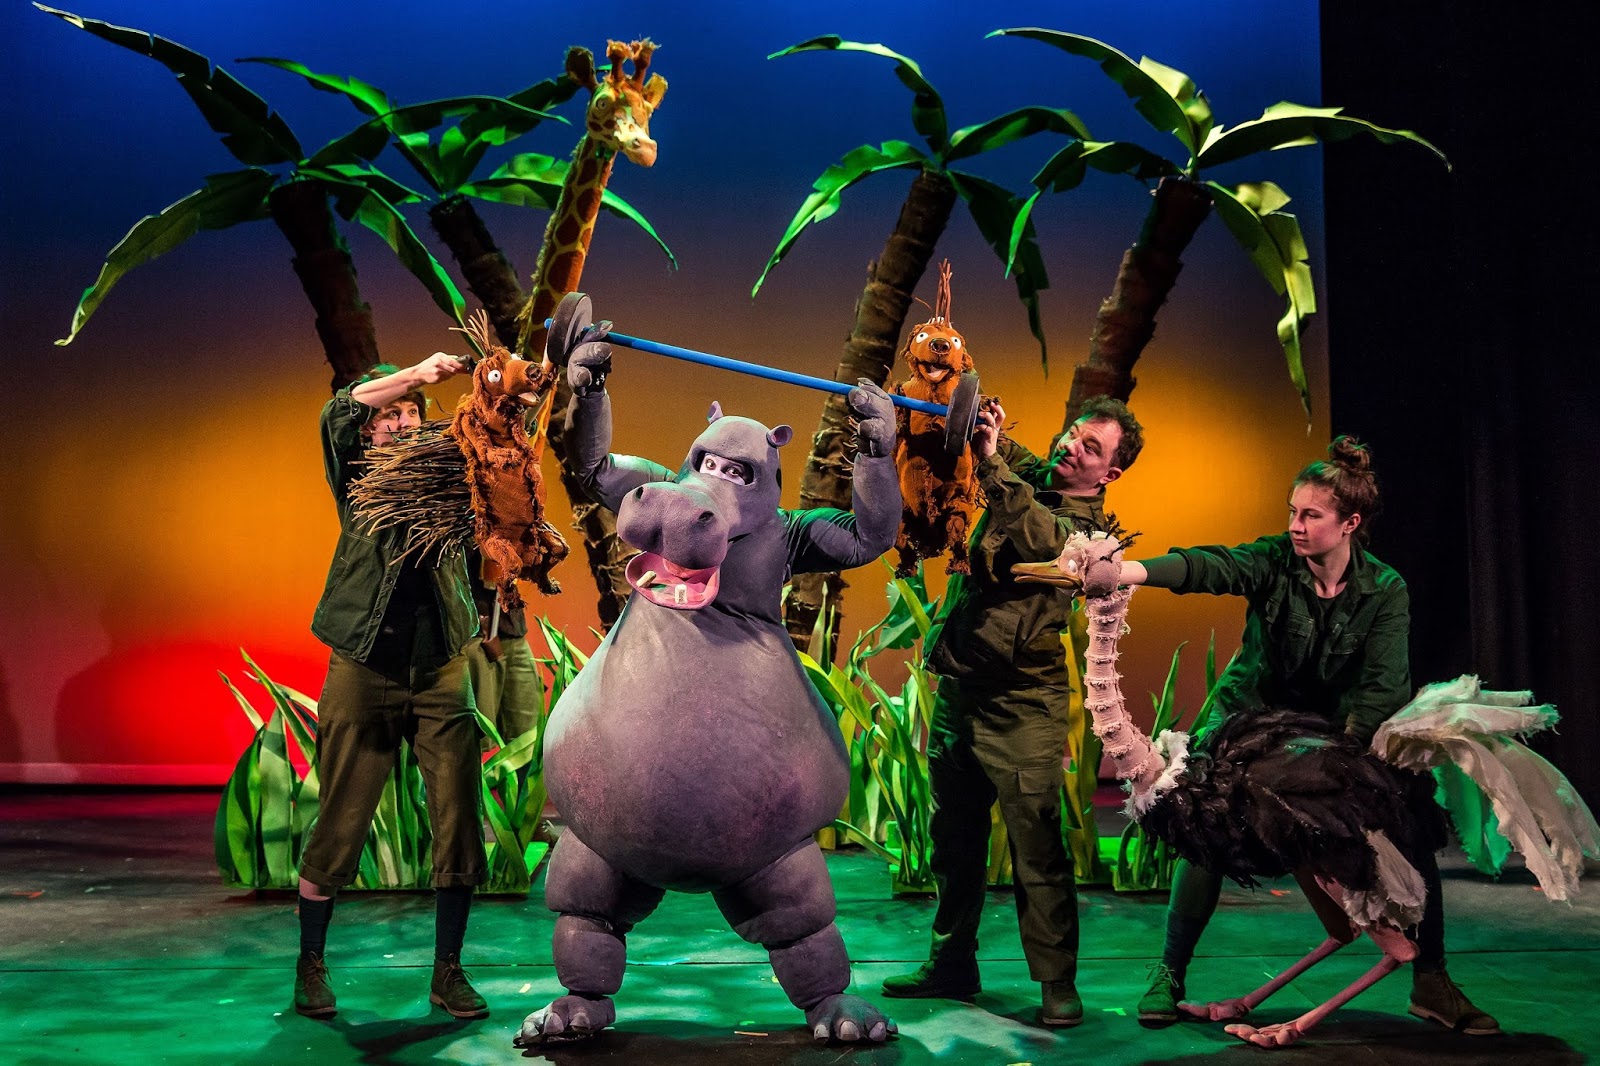 The First Hippo on the Moon by David Walliams makes it's North East Theatre Debut at the Tyne Theatre and Opera House , Newcastle | Saturday 4 Feb 2017 | 1:30pm plus ticket giveaway